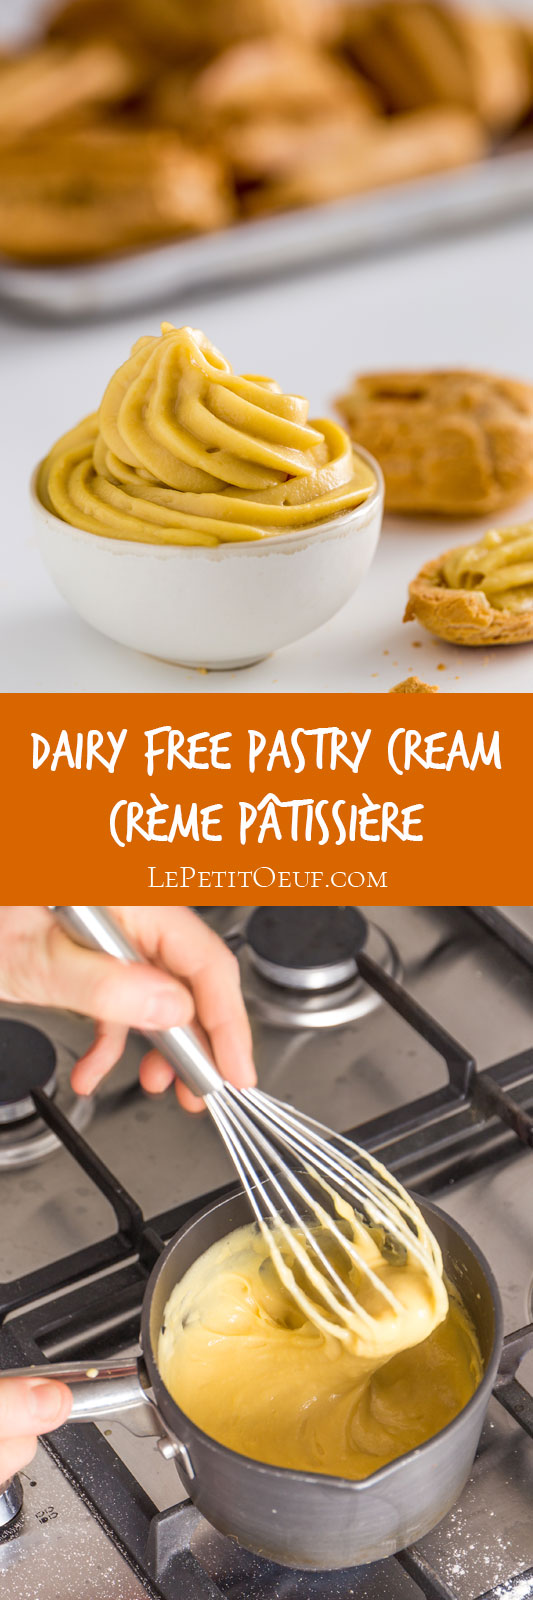 Dairy Free Pastry Cream, otherwise known as Crème Pâtissière is a sticky sweet custard filling for eclairs, profiteroles, doughnuts, cakes and any other patisserie or bake you care to make! It's made with just eggs, dairy free milk, sugar and flour, which gives a lusciously silky sweet sauce to create a sweet treat or dessert for your friends and family.